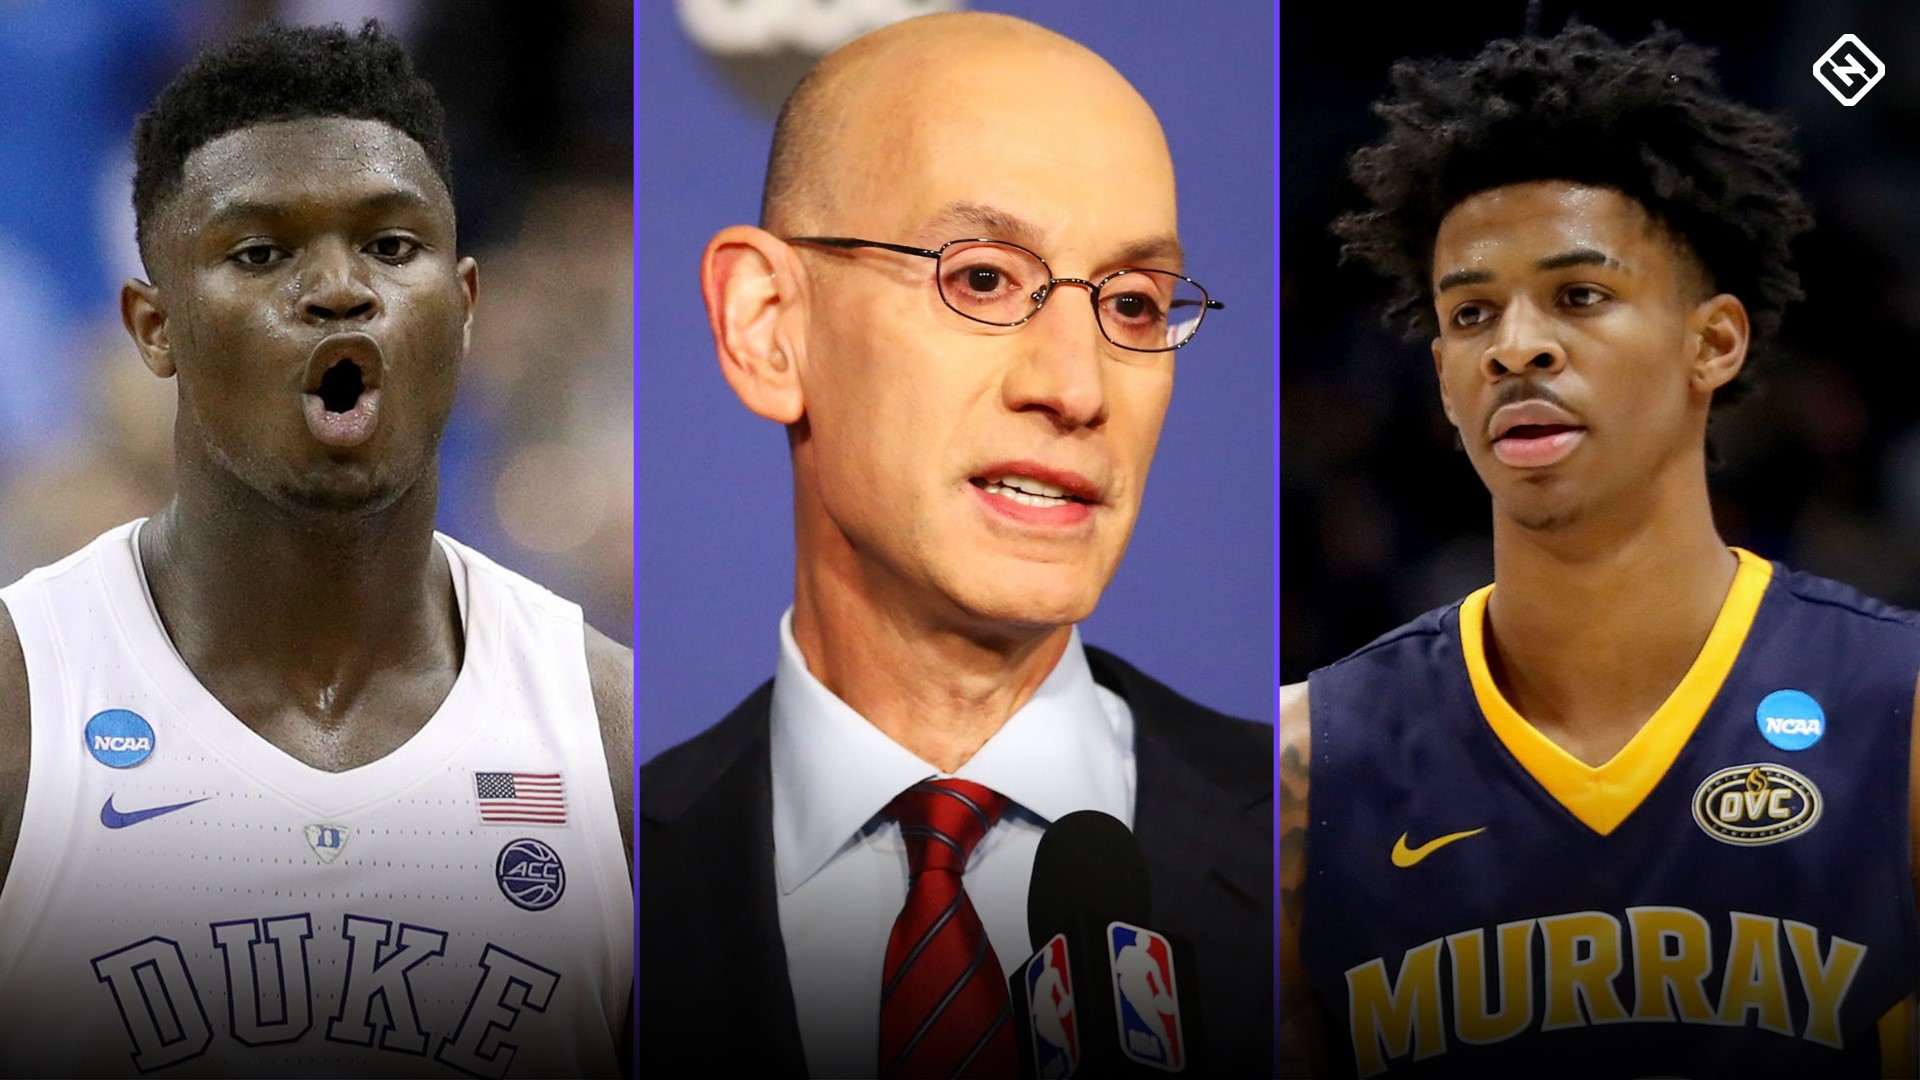 NBA Draft picks 2019: Complete list of results for Rounds 1 and 2